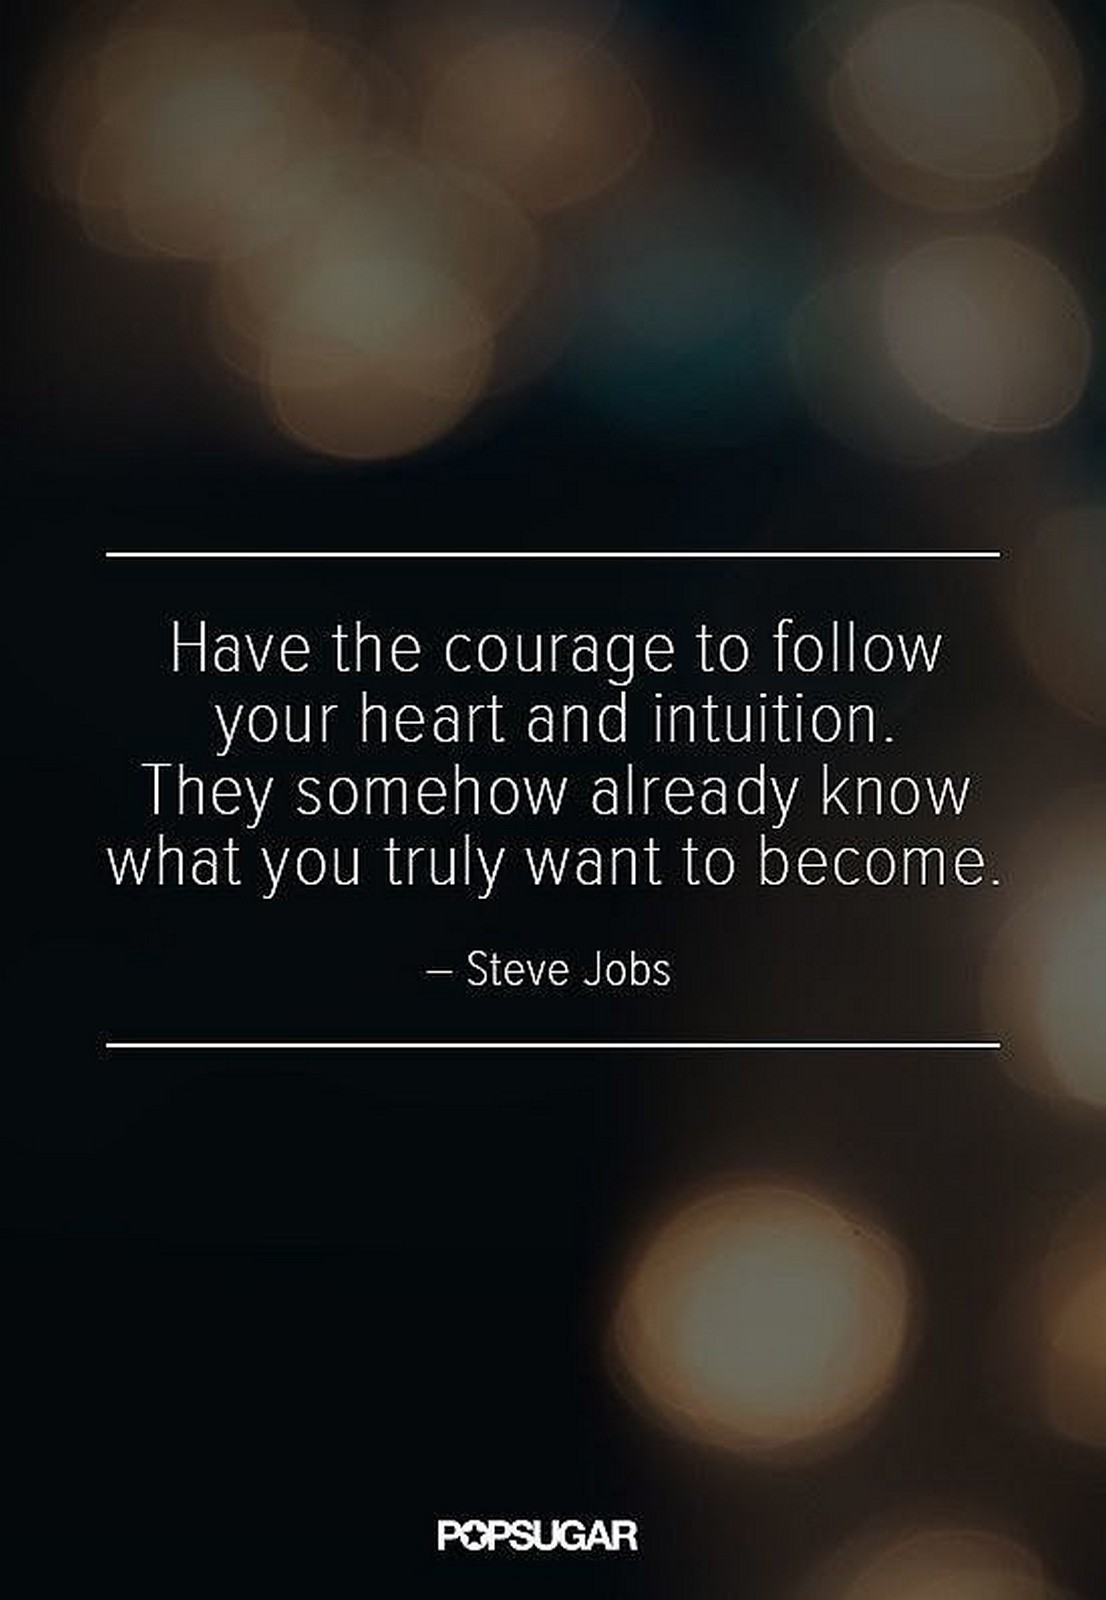 19 Best Steve Jobs Quotes - "Have the courage to follow your heart and intuition. They somehow already know what you truly want to become."